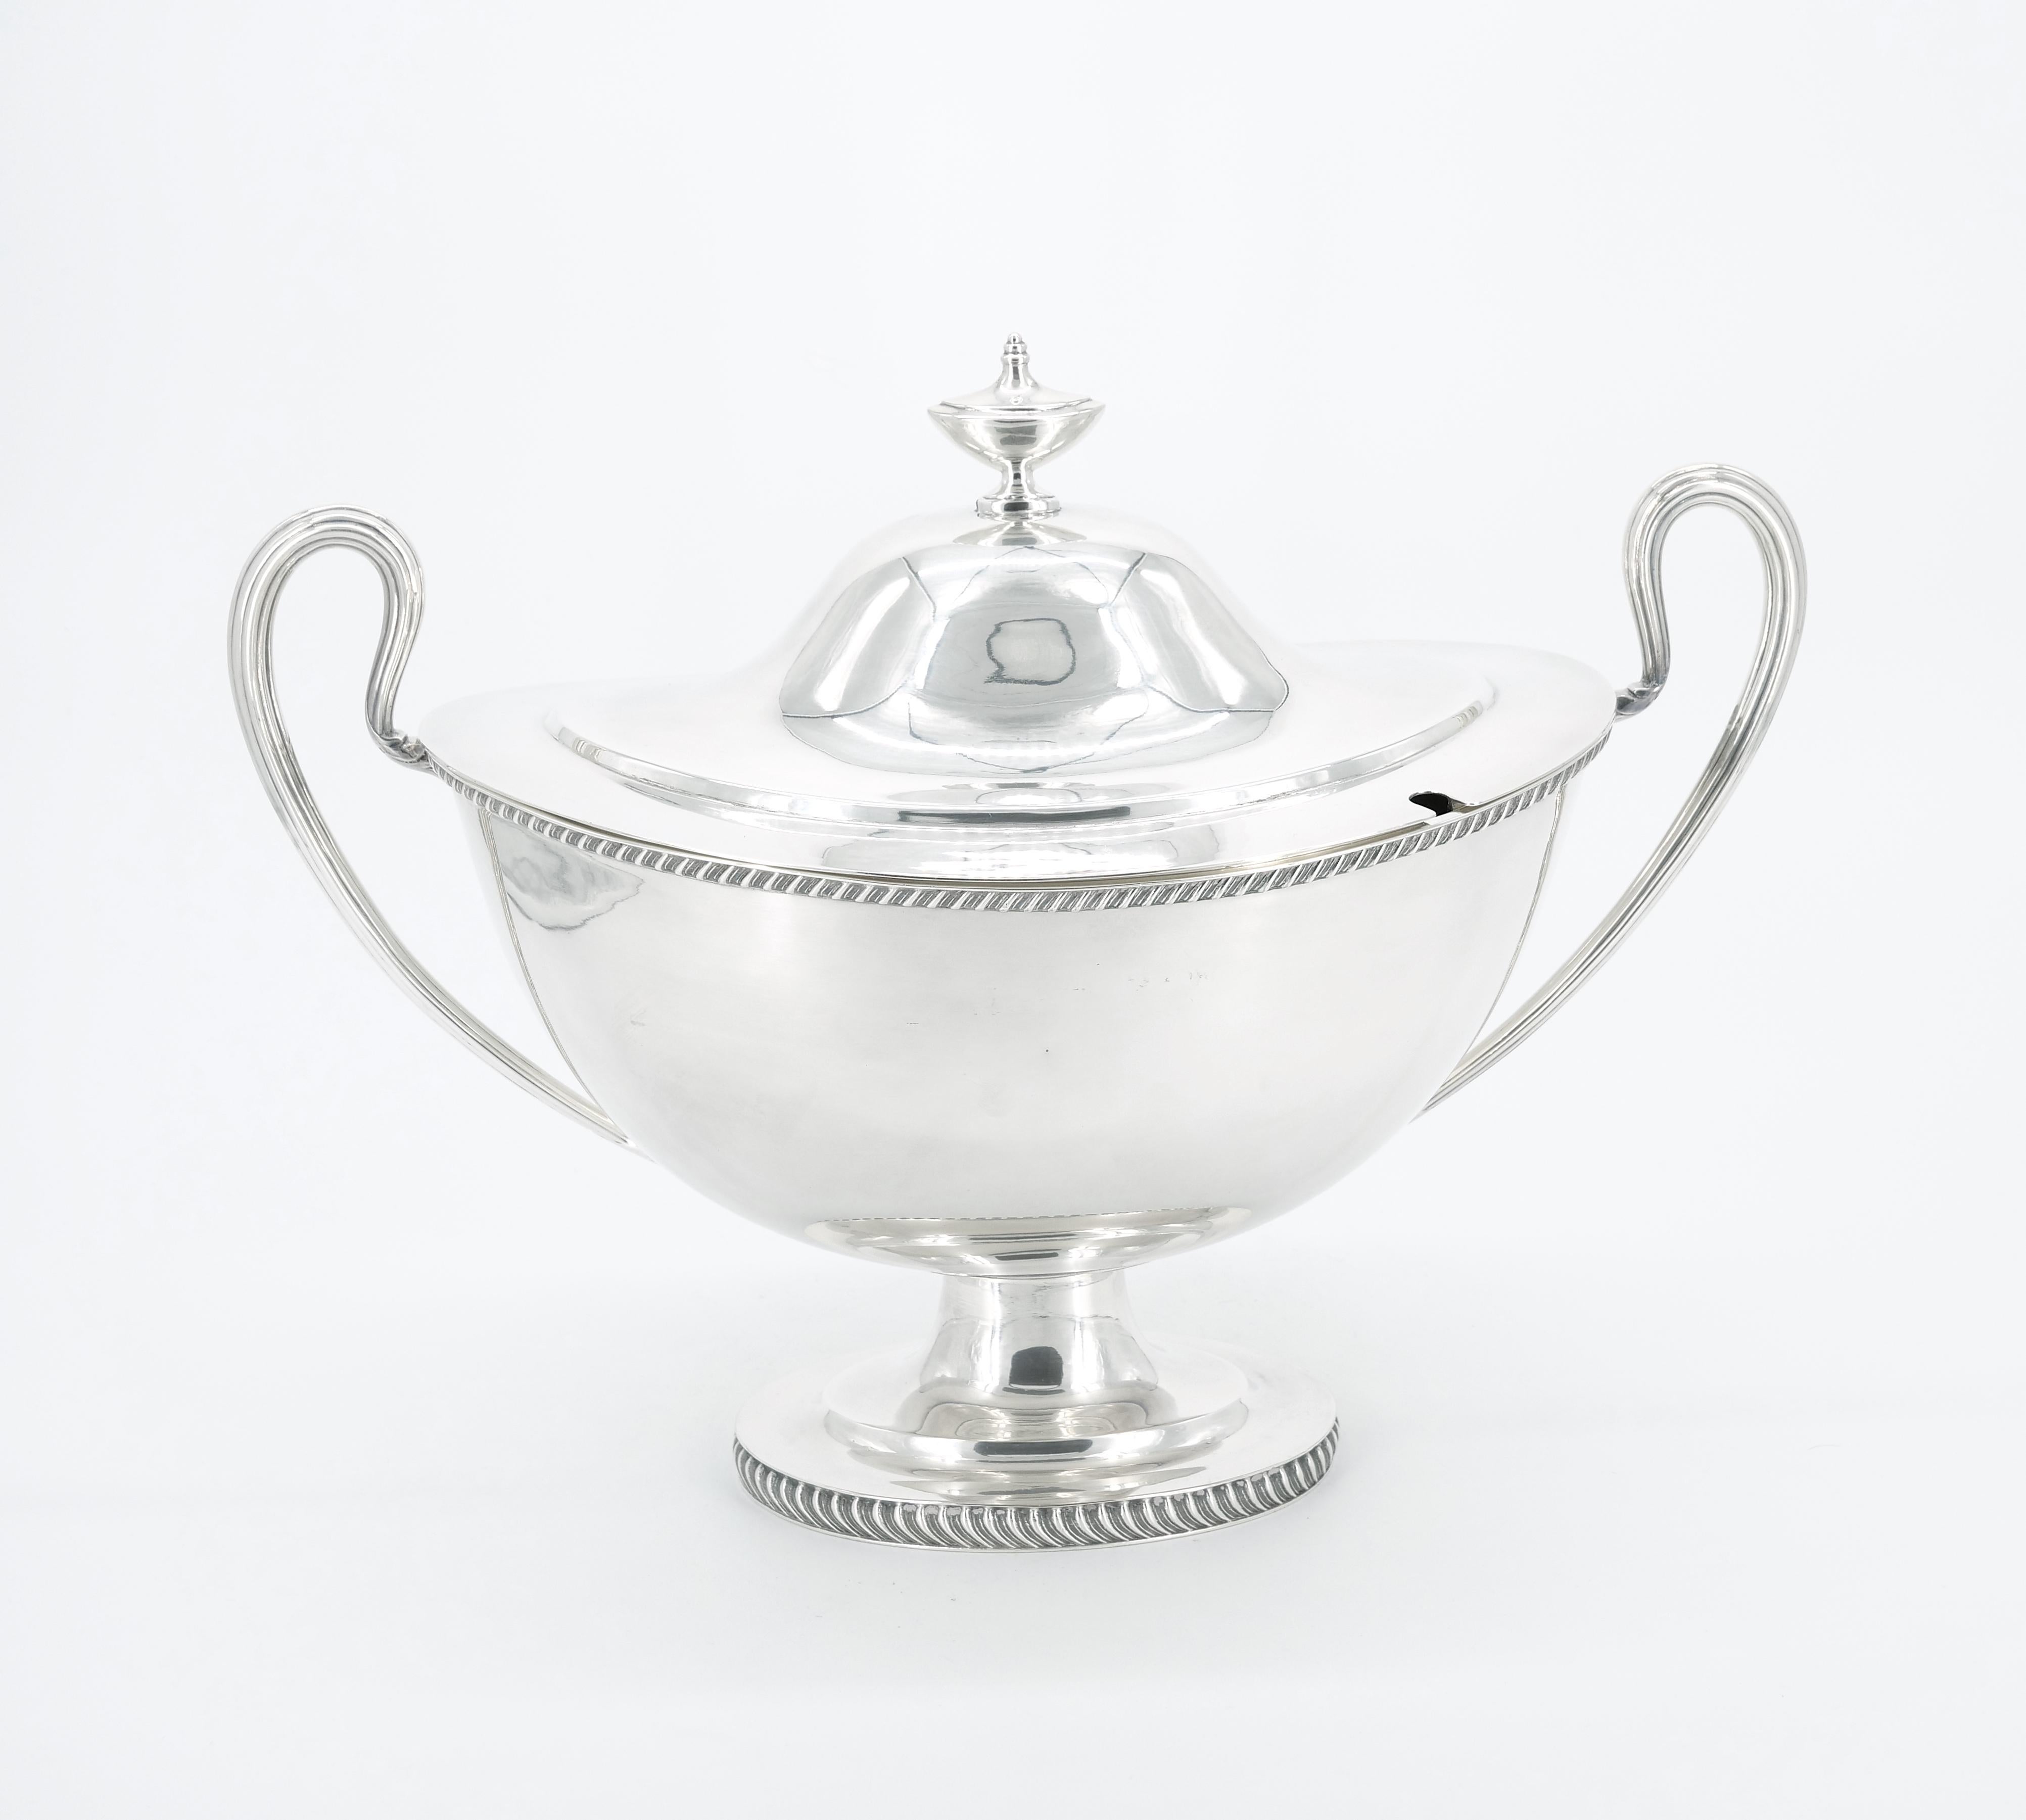 Large English Silver Plate Tableware Covered Tureen For Sale 2